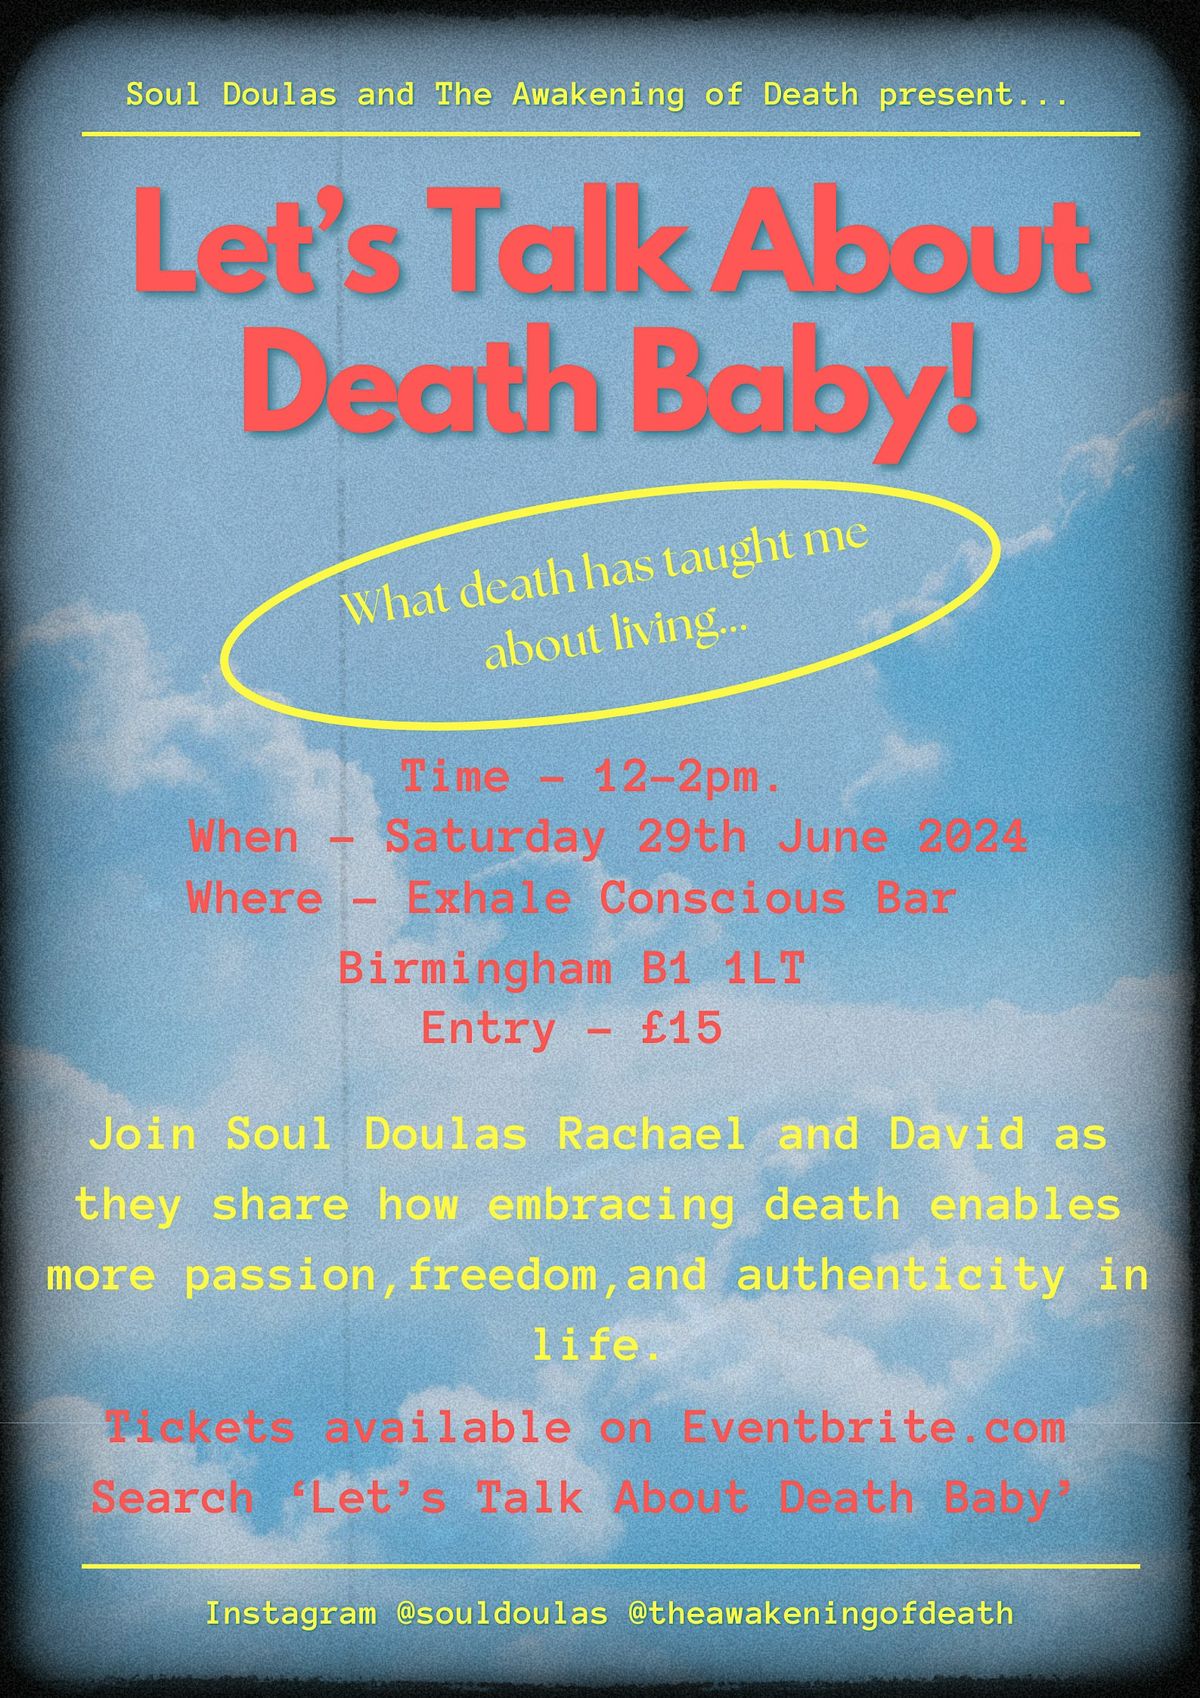 Let's Talk About Death Baby!